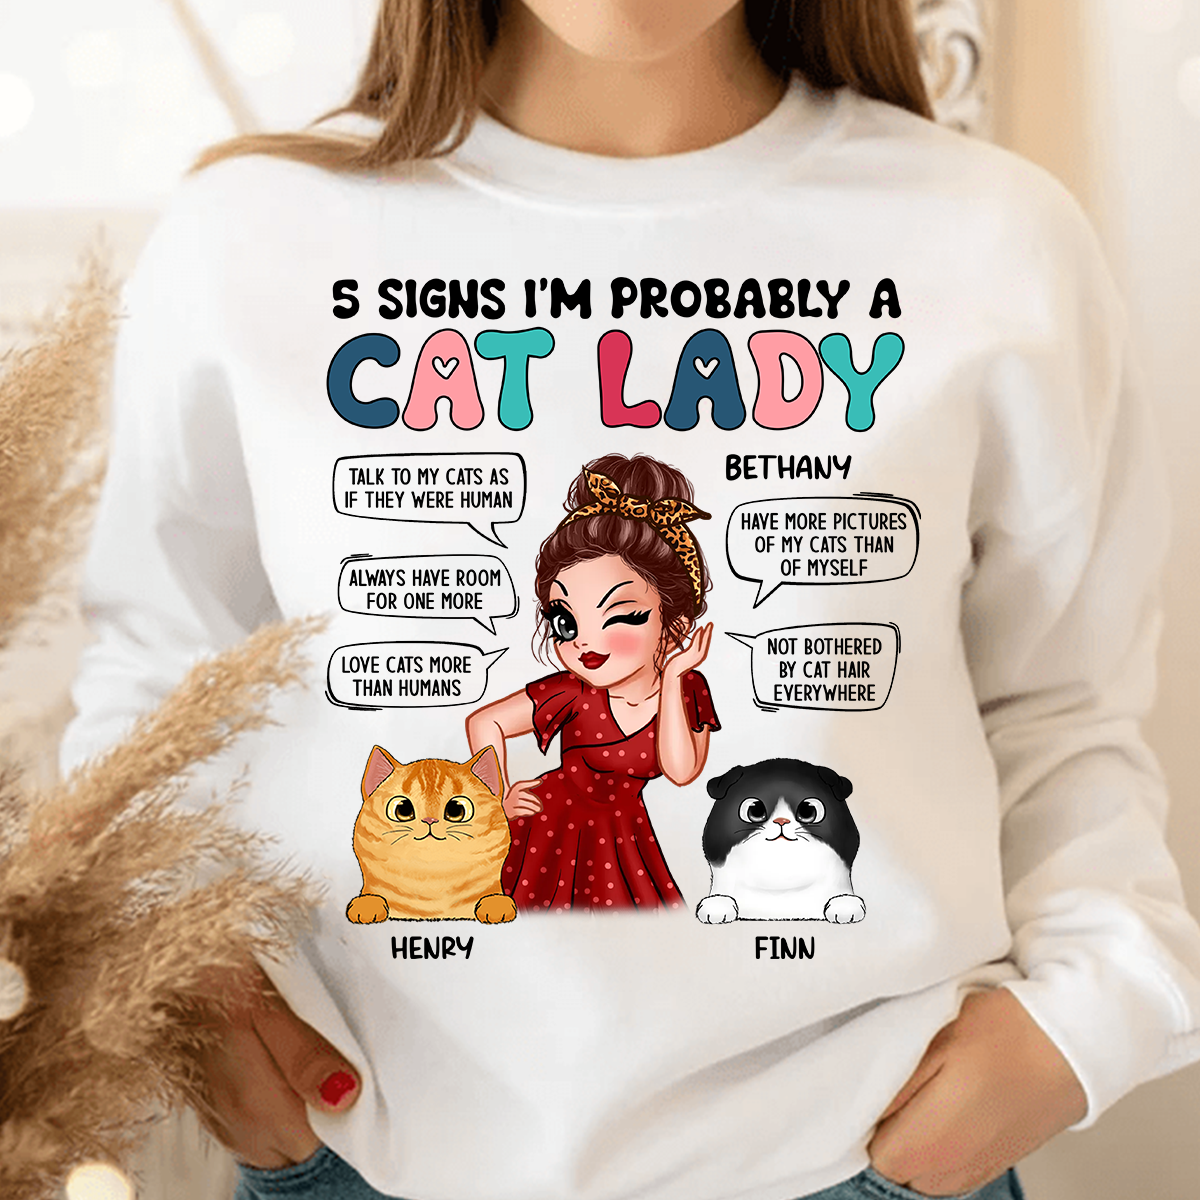 5 Signs I’m Probably A Cat Lady Cat Personalized Shirt, Personalized Gift for Cat Lovers, Cat Dad, Cat Mom